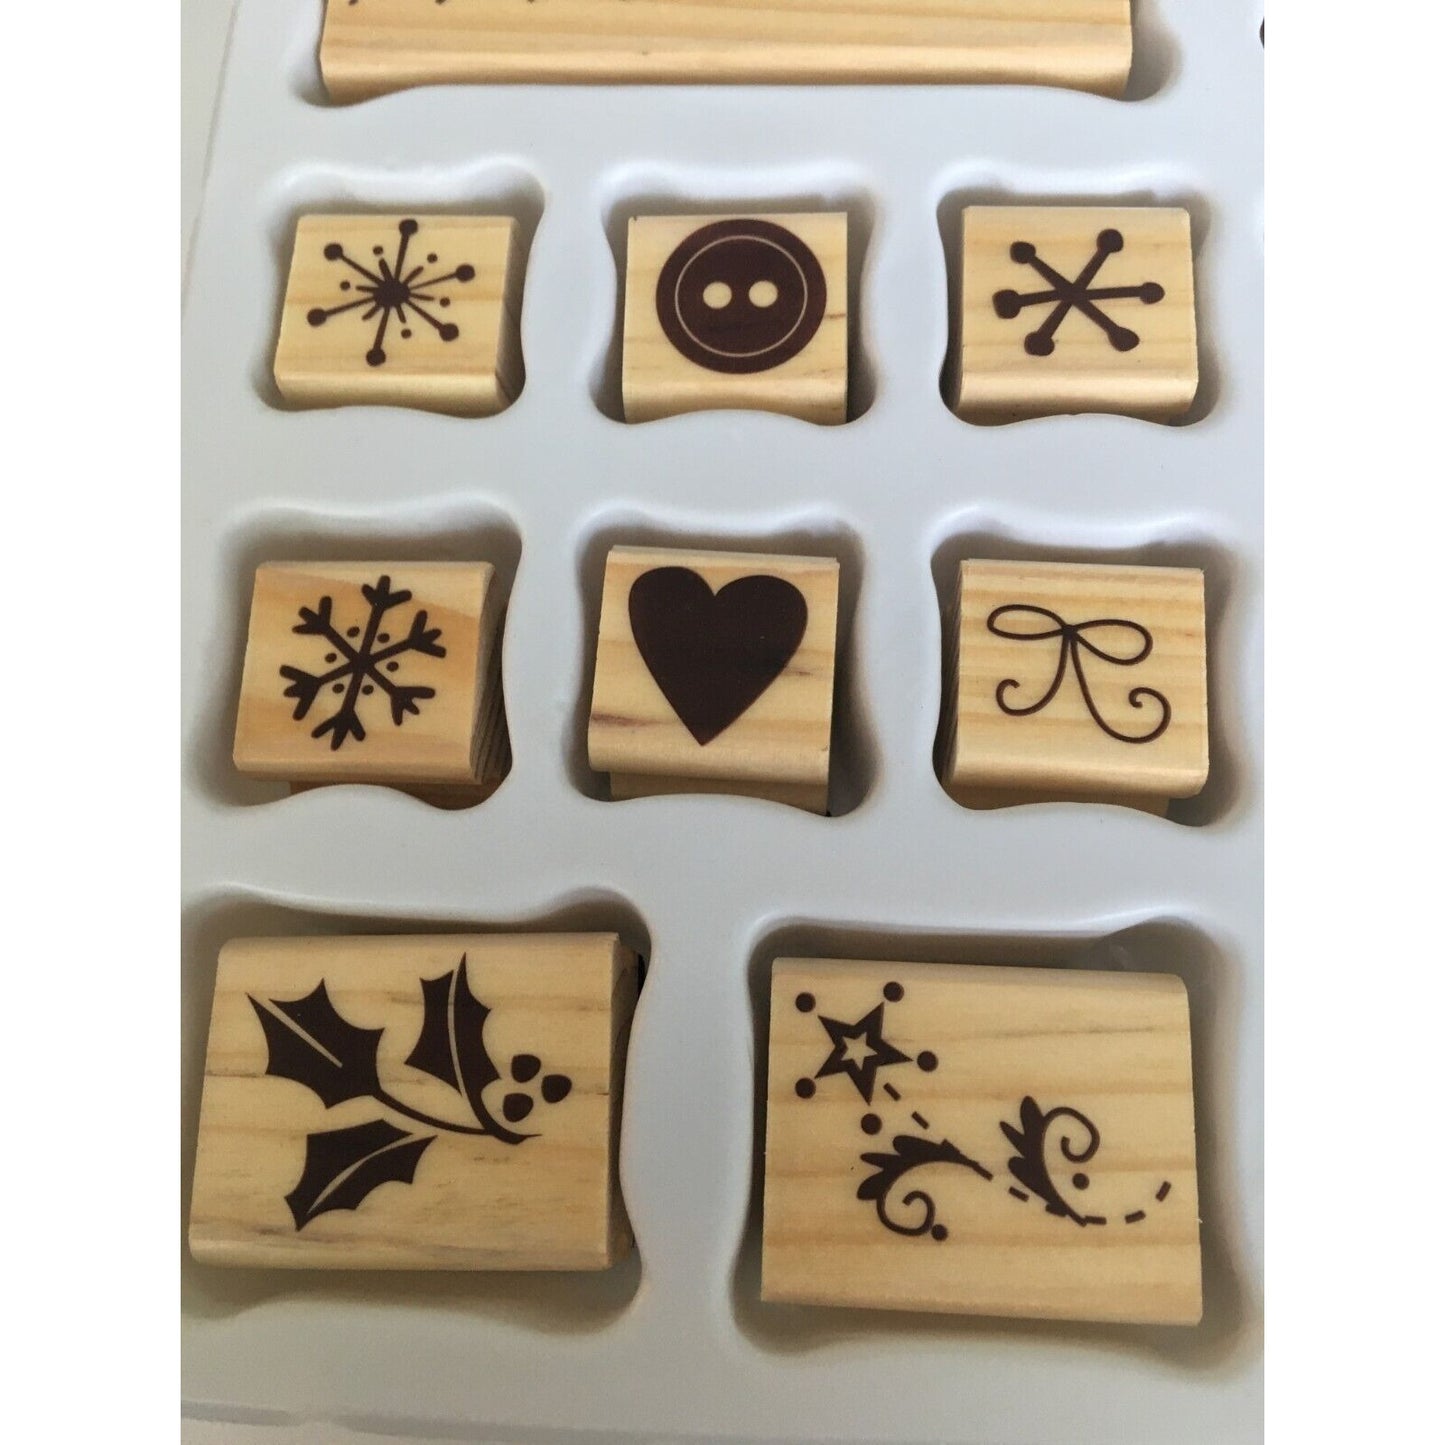 Carlton Cards Holiday Rubber Stamp Set 17 To From Gift Tag Card Making Christmas